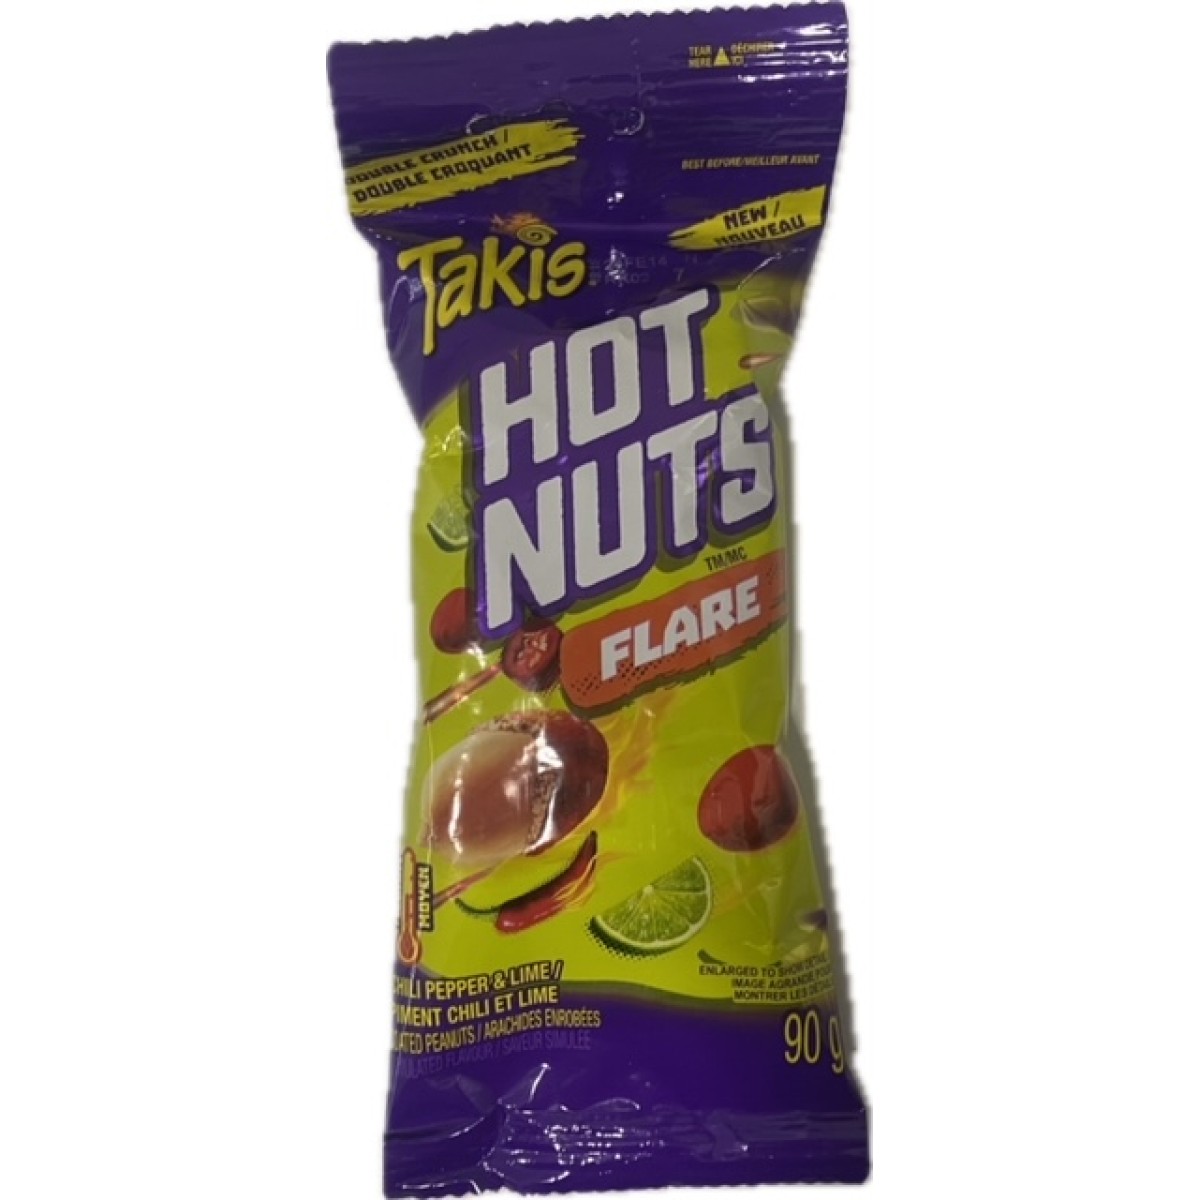 takis hot nuts flare 90gr